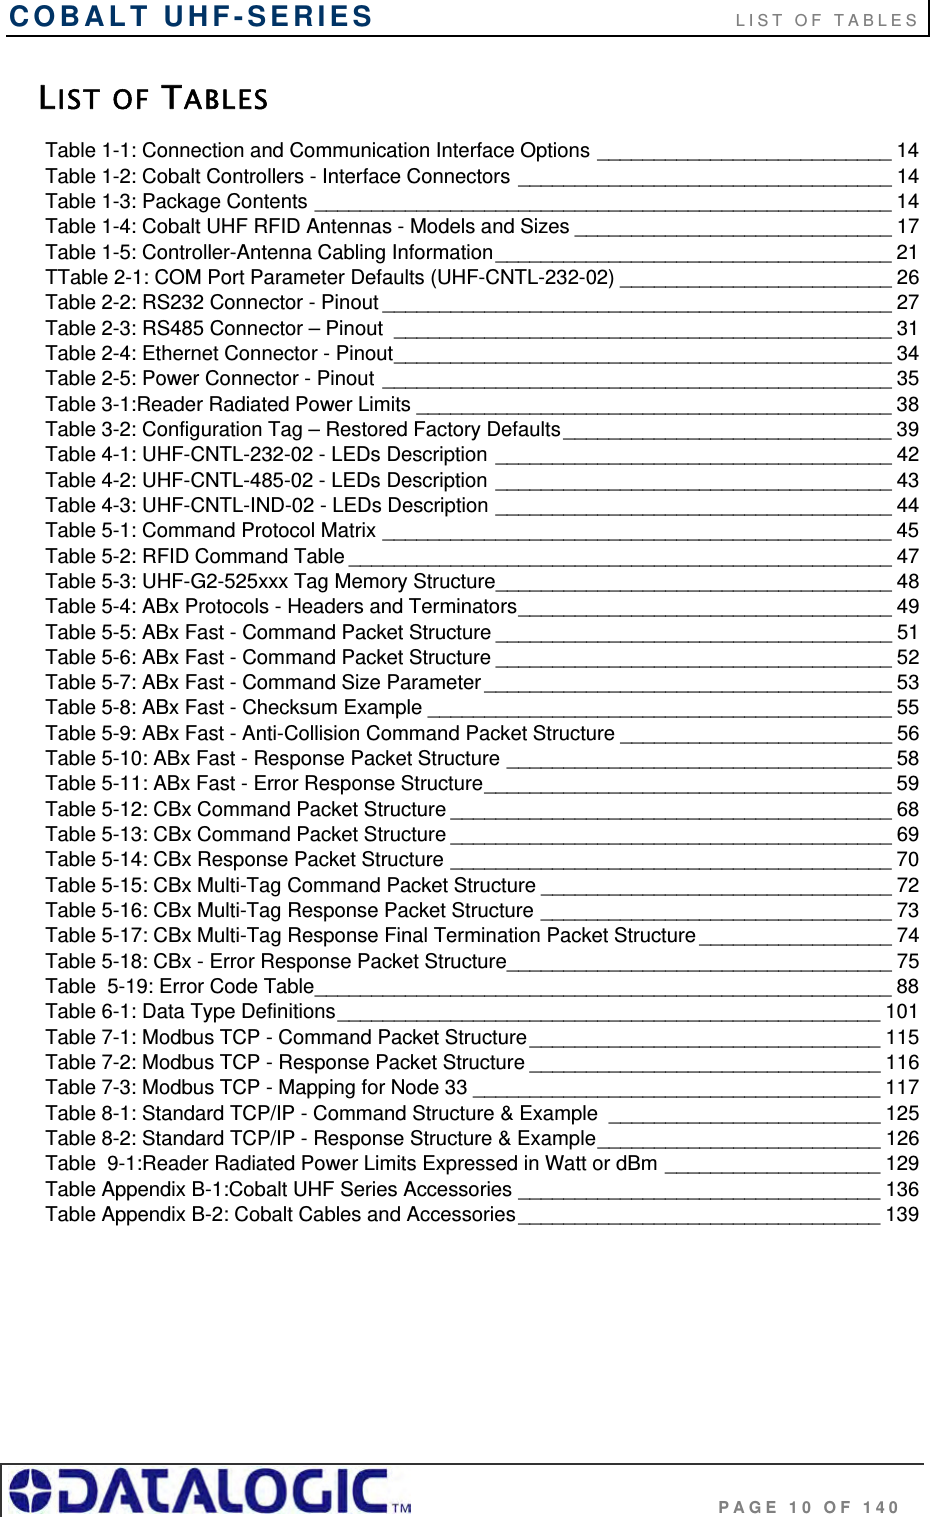 COBALT UHF-SERIES     LIST OF TABLES                                     PAGE 10 OF 140 LIST OF TABLES Table 1-1: Connection and Communication Interface Options __________________________ 14 Table 1-2: Cobalt Controllers - Interface Connectors _________________________________ 14 Table 1-3: Package Contents ___________________________________________________ 14 Table 1-4: Cobalt UHF RFID Antennas - Models and Sizes ____________________________ 17 Table 1-5: Controller-Antenna Cabling Information ___________________________________ 21 TTable 2-1: COM Port Parameter Defaults (UHF-CNTL-232-02) ________________________ 26 Table 2-2: RS232 Connector - Pinout _____________________________________________ 27 Table 2-3: RS485 Connector – Pinout ____________________________________________ 31 Table 2-4: Ethernet Connector - Pinout____________________________________________ 34 Table 2-5: Power Connector - Pinout _____________________________________________ 35 Table 3-1:Reader Radiated Power Limits __________________________________________ 38 Table 3-2: Configuration Tag – Restored Factory Defaults _____________________________ 39 Table 4-1: UHF-CNTL-232-02 - LEDs Description ___________________________________ 42 Table 4-2: UHF-CNTL-485-02 - LEDs Description ___________________________________ 43 Table 4-3: UHF-CNTL-IND-02 - LEDs Description ___________________________________ 44 Table 5-1: Command Protocol Matrix _____________________________________________ 45 Table 5-2: RFID Command Table ________________________________________________ 47 Table 5-3: UHF-G2-525xxx Tag Memory Structure___________________________________ 48 Table 5-4: ABx Protocols - Headers and Terminators_________________________________ 49 Table 5-5: ABx Fast - Command Packet Structure ___________________________________ 51 Table 5-6: ABx Fast - Command Packet Structure ___________________________________ 52 Table 5-7: ABx Fast - Command Size Parameter ____________________________________ 53 Table 5-8: ABx Fast - Checksum Example _________________________________________ 55 Table 5-9: ABx Fast - Anti-Collision Command Packet Structure ________________________ 56 Table 5-10: ABx Fast - Response Packet Structure __________________________________ 58 Table 5-11: ABx Fast - Error Response Structure____________________________________ 59 Table 5-12: CBx Command Packet Structure _______________________________________ 68 Table 5-13: CBx Command Packet Structure _______________________________________ 69 Table 5-14: CBx Response Packet Structure _______________________________________ 70 Table 5-15: CBx Multi-Tag Command Packet Structure _______________________________ 72 Table 5-16: CBx Multi-Tag Response Packet Structure _______________________________ 73 Table 5-17: CBx Multi-Tag Response Final Termination Packet Structure _________________ 74 Table 5-18: CBx - Error Response Packet Structure__________________________________ 75 Table  5-19: Error Code Table___________________________________________________ 88 Table 6-1: Data Type Definitions________________________________________________ 101 Table 7-1: Modbus TCP - Command Packet Structure _______________________________ 115 Table 7-2: Modbus TCP - Response Packet Structure _______________________________ 116 Table 7-3: Modbus TCP - Mapping for Node 33 ____________________________________ 117 Table 8-1: Standard TCP/IP - Command Structure &amp; Example ________________________ 125 Table 8-2: Standard TCP/IP - Response Structure &amp; Example_________________________ 126 Table  9-1:Reader Radiated Power Limits Expressed in Watt or dBm ___________________ 129 Table Appendix B-1:Cobalt UHF Series Accessories ________________________________ 136 Table Appendix B-2: Cobalt Cables and Accessories ________________________________ 139  